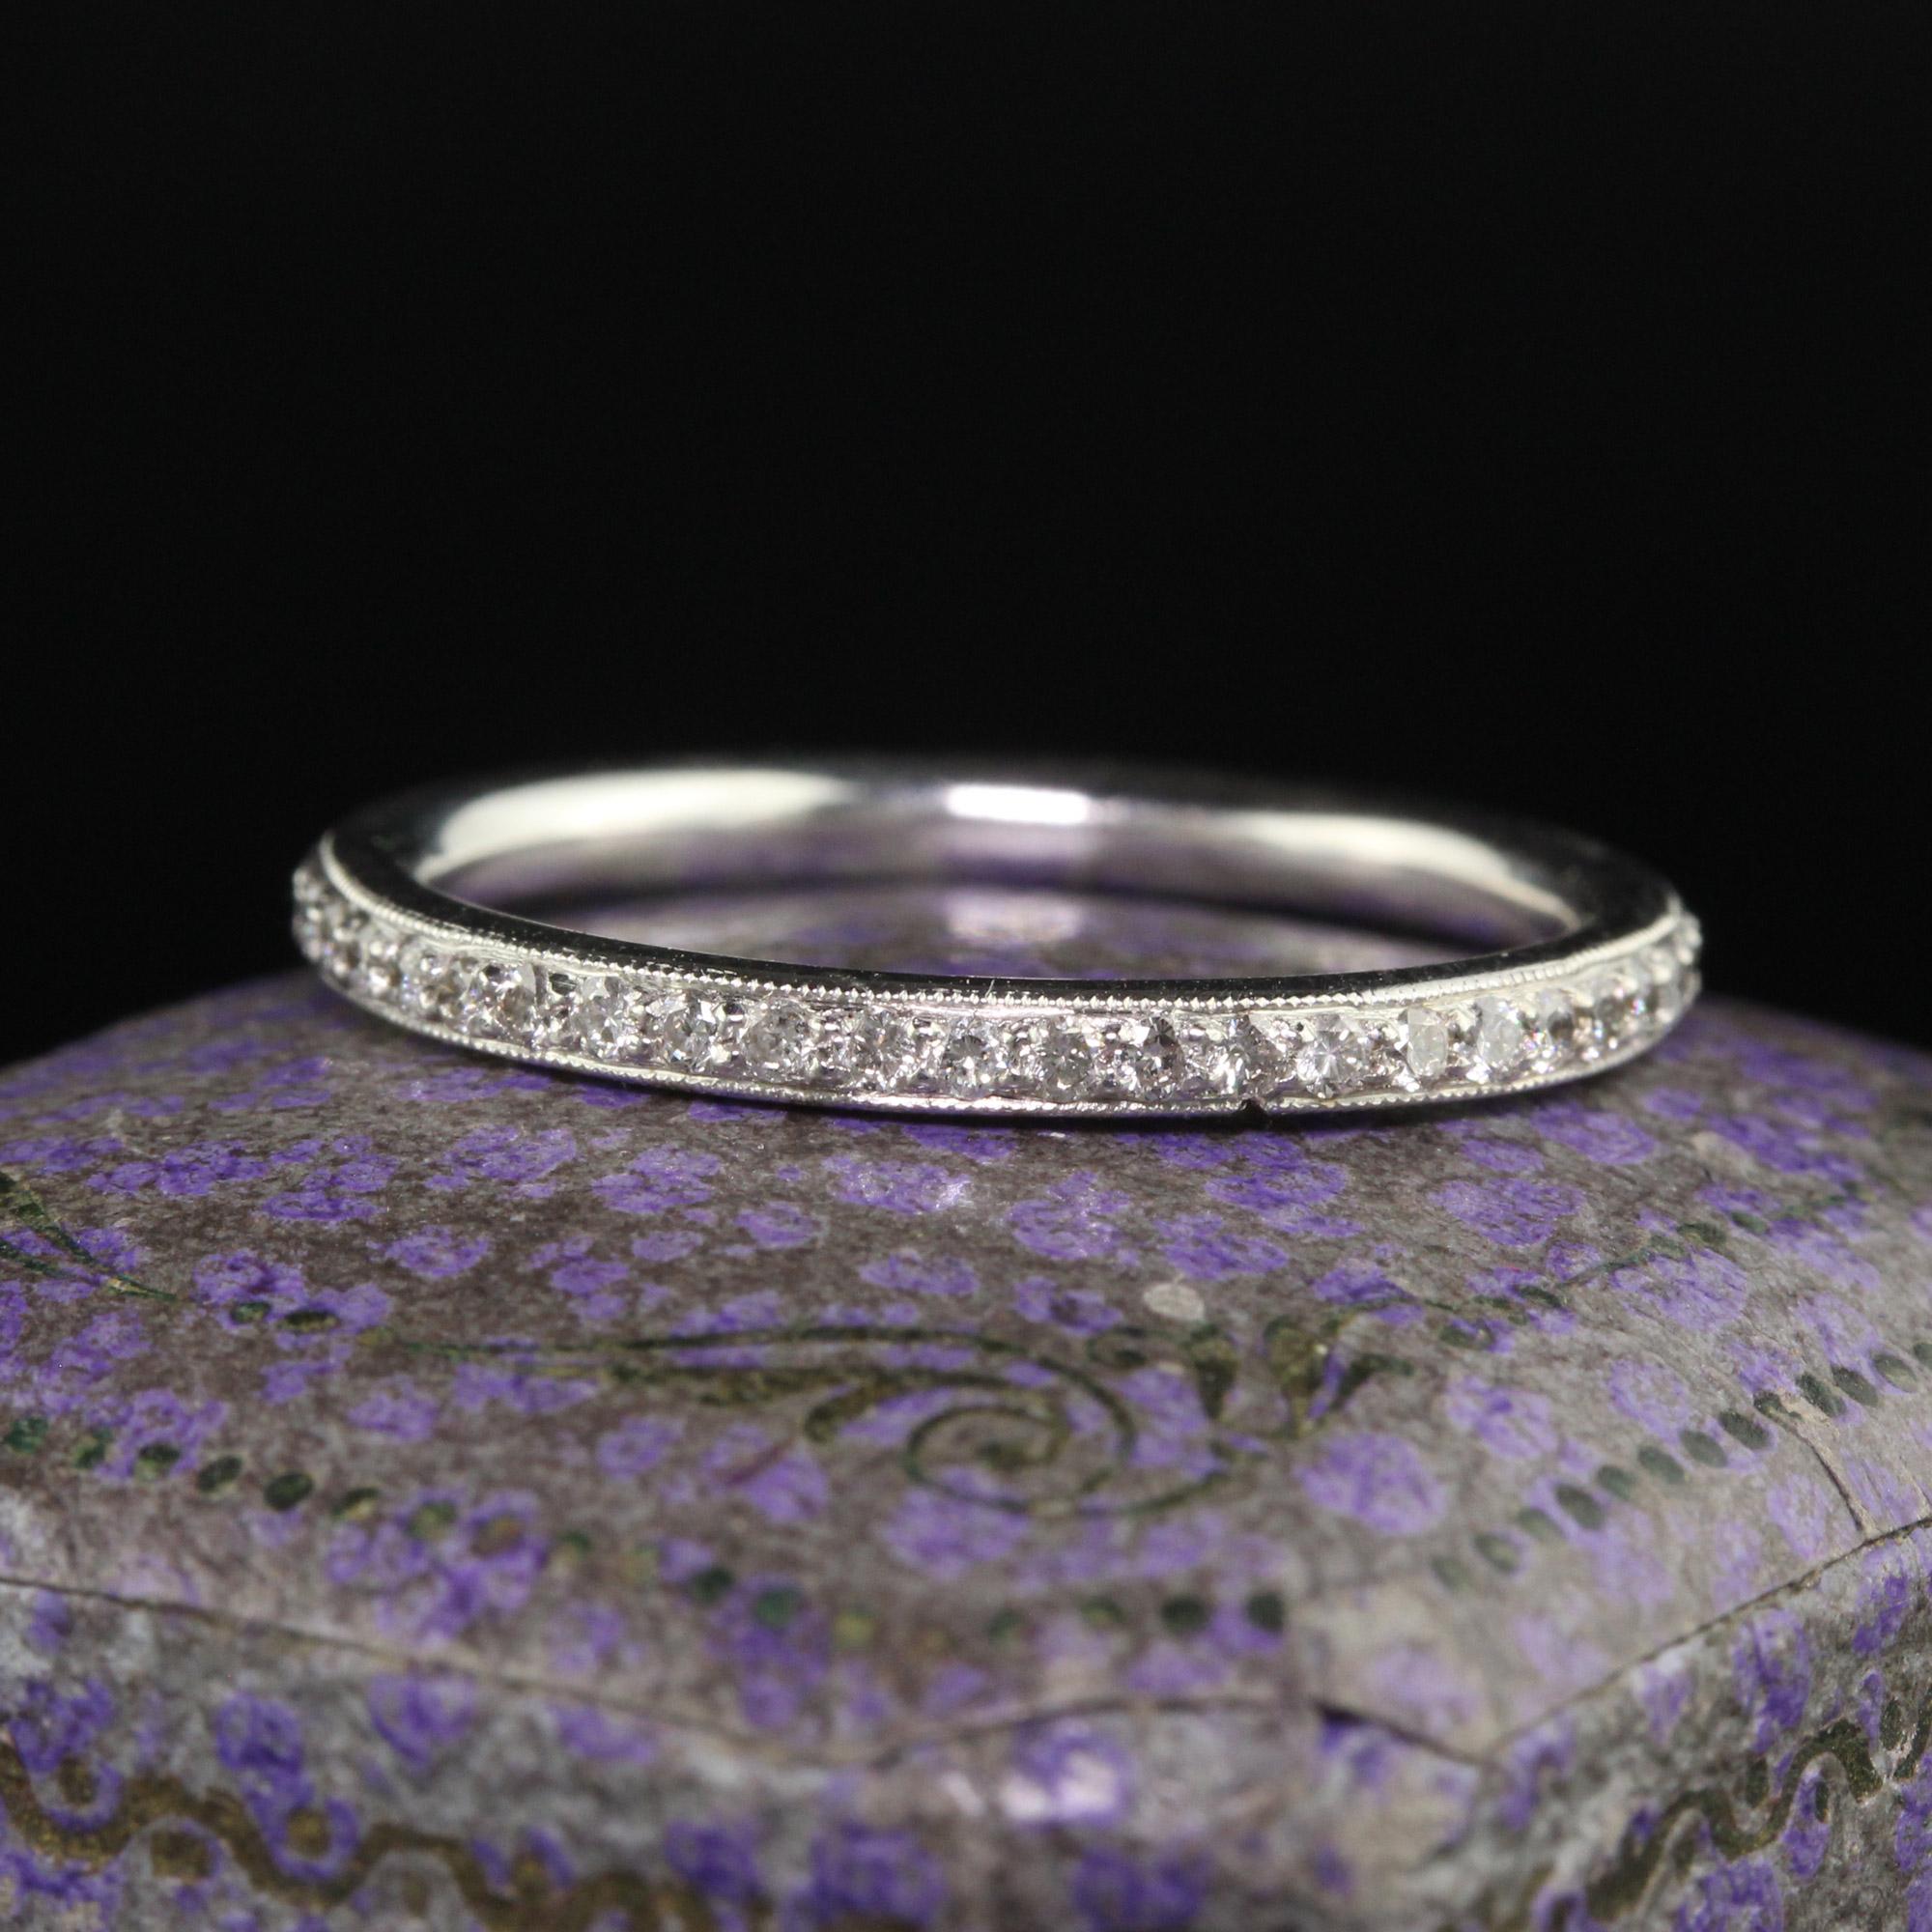 Beautiful Vintage 18K White Gold Round Cut Eternity Wedding Band - Size 7. This classic eternity wedding band is crafted in 18k white gold. There are round cut diamonds going around the entire ring and is in good condition. The ring is in good